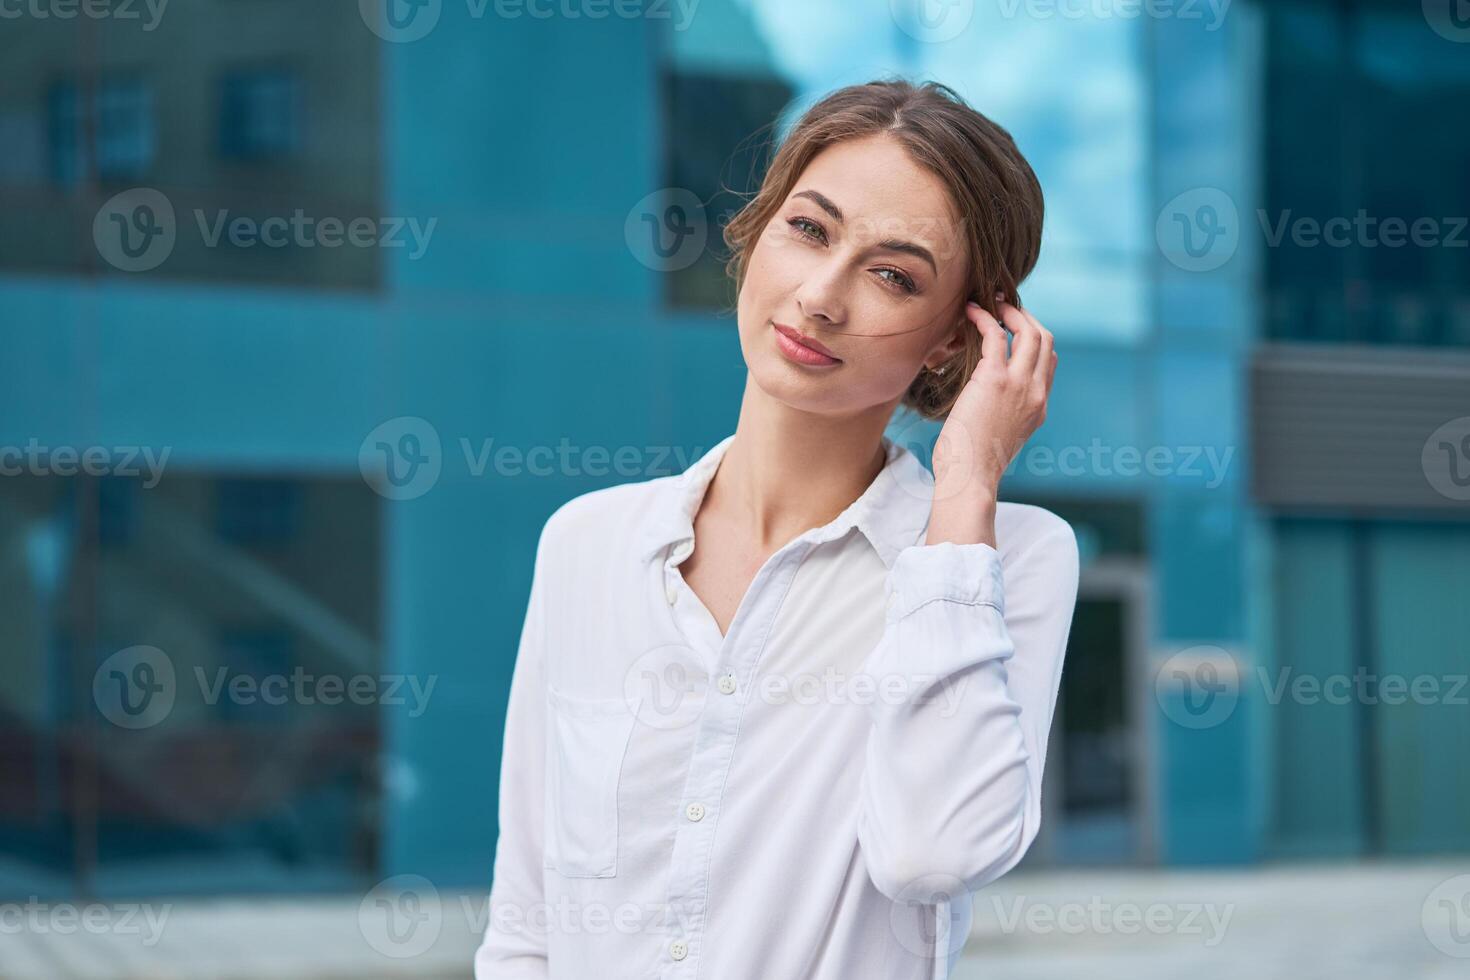 Businesswoman successful woman business person standing outdoor corporate building exterior. Pensiv caucasian confidence professional business woman middle age photo